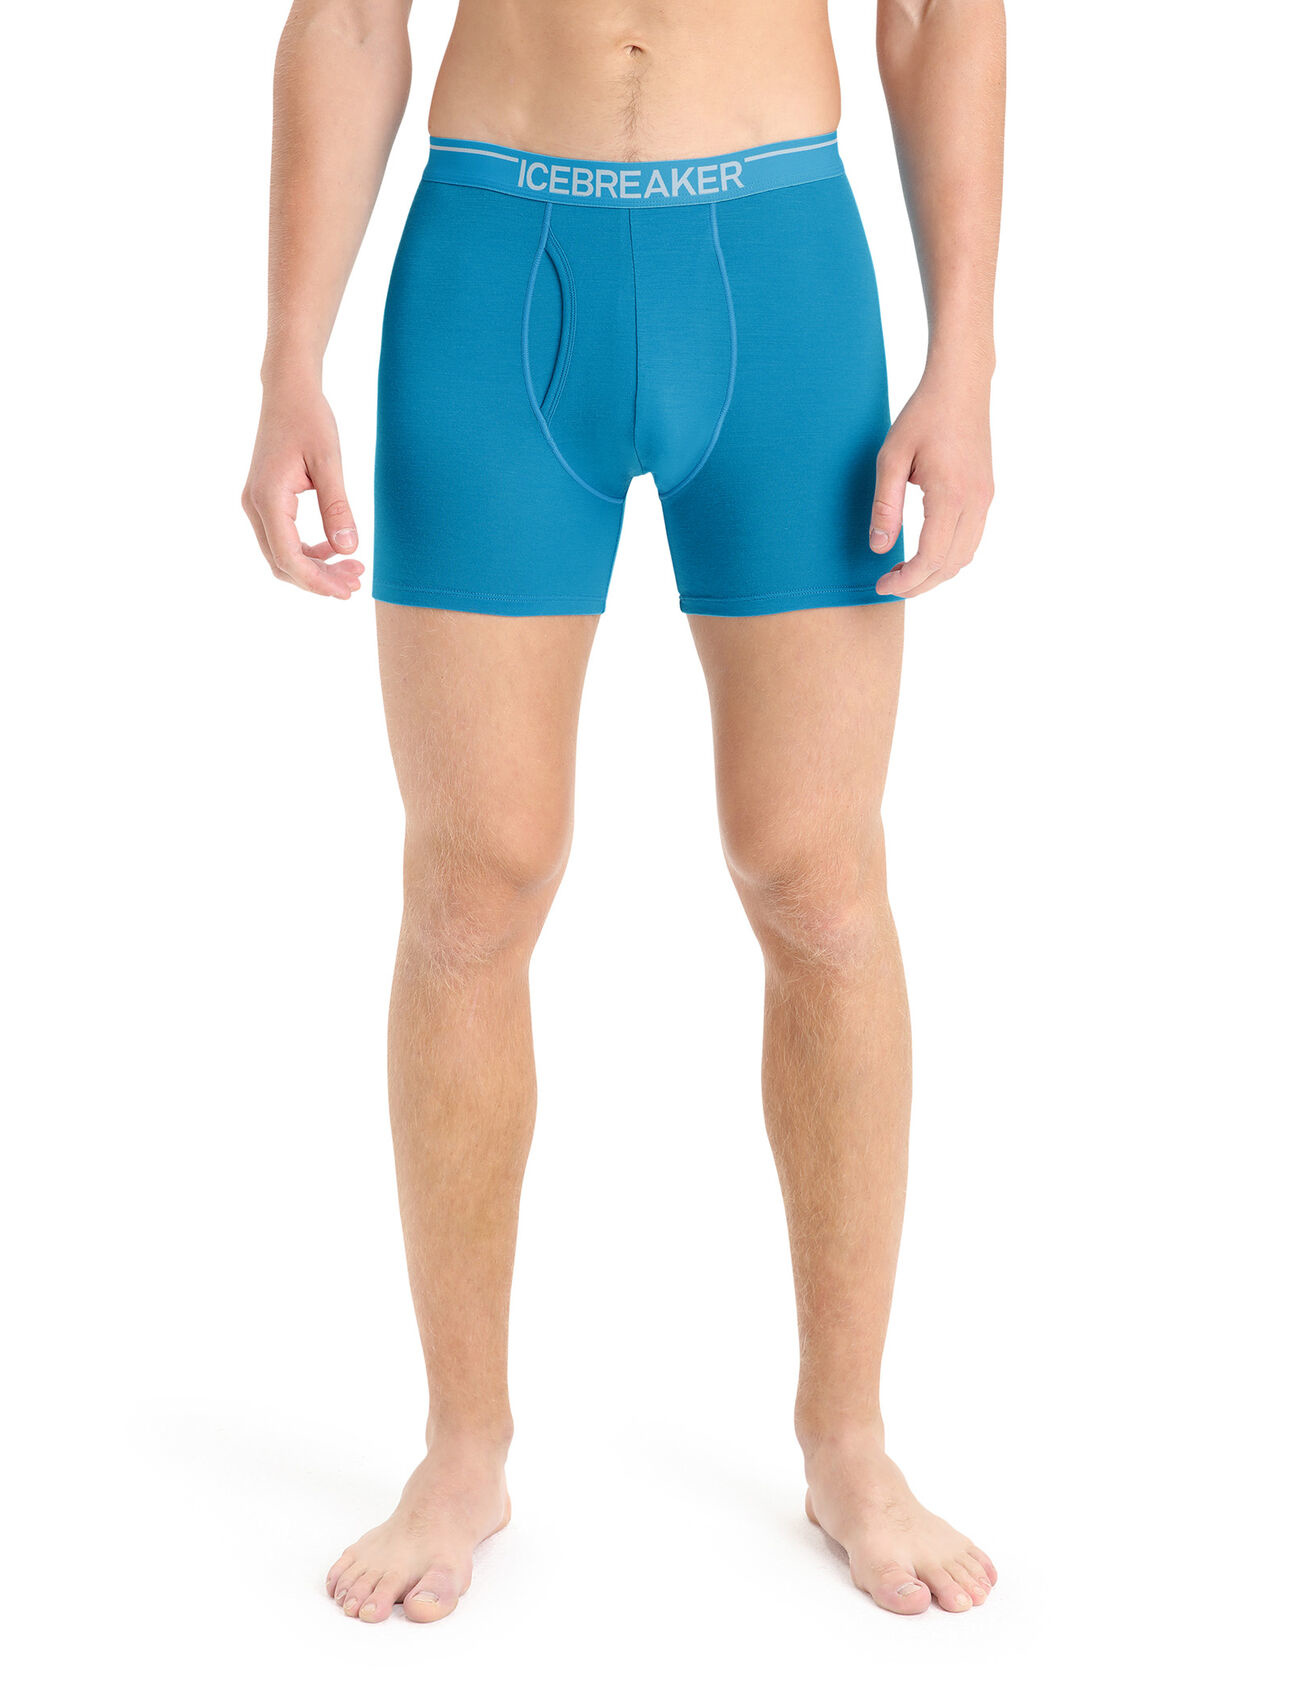 Mn Anatomica Boxer wFly - Track 'N Trail